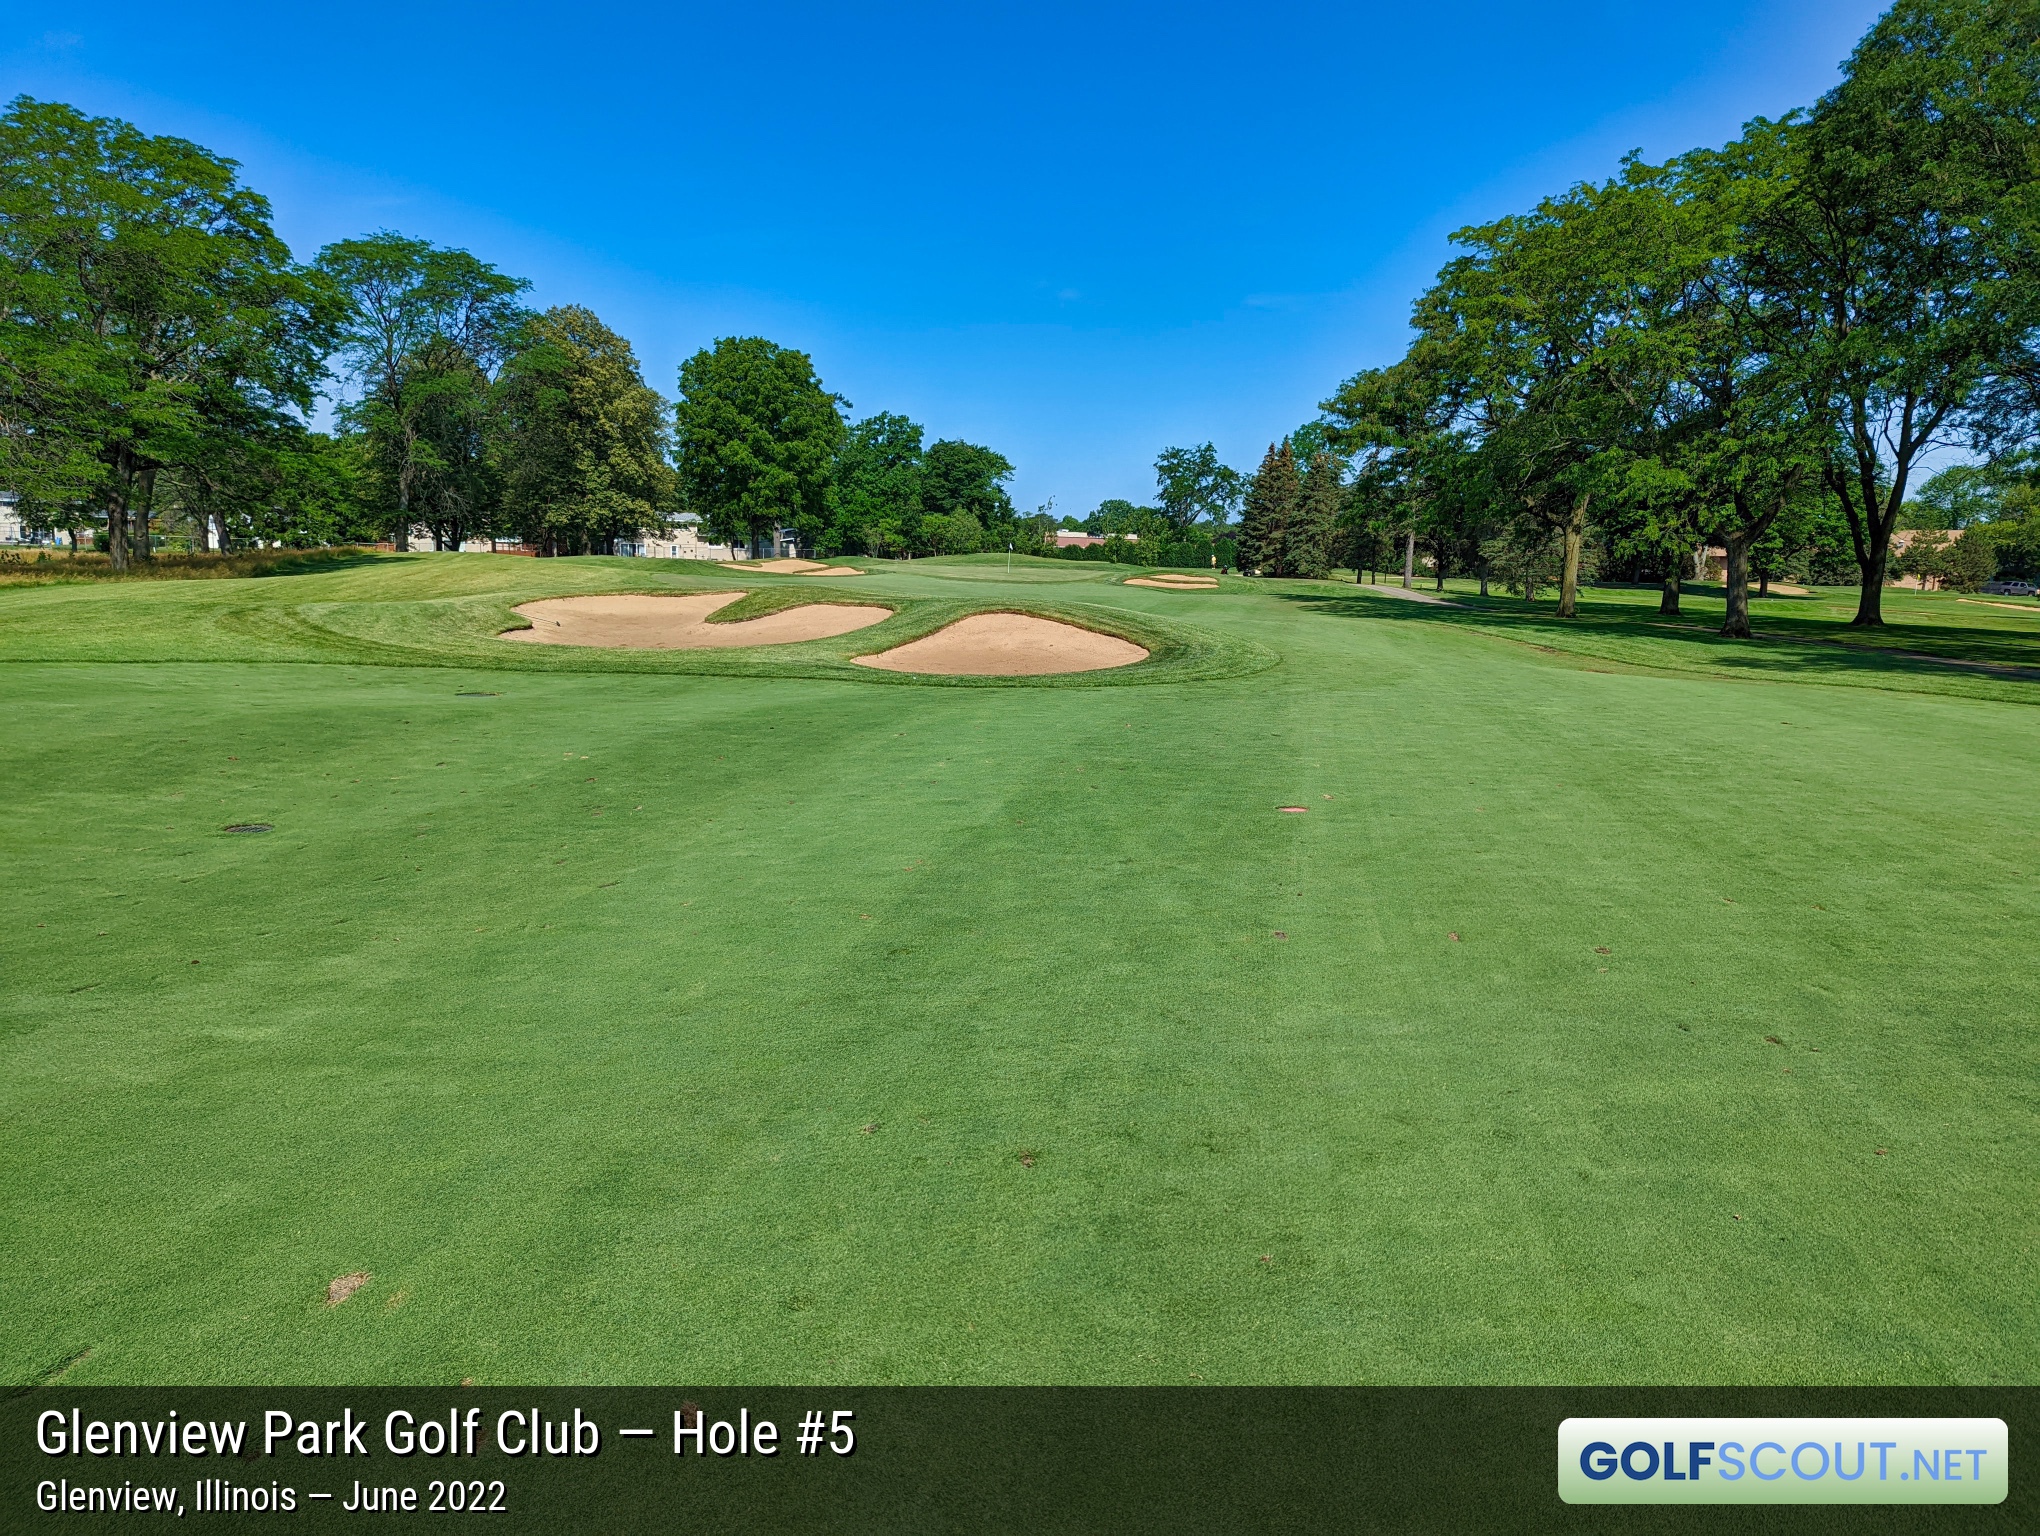 Photo of hole #5 at Glenview Park Golf Club in Glenview, Illinois. 